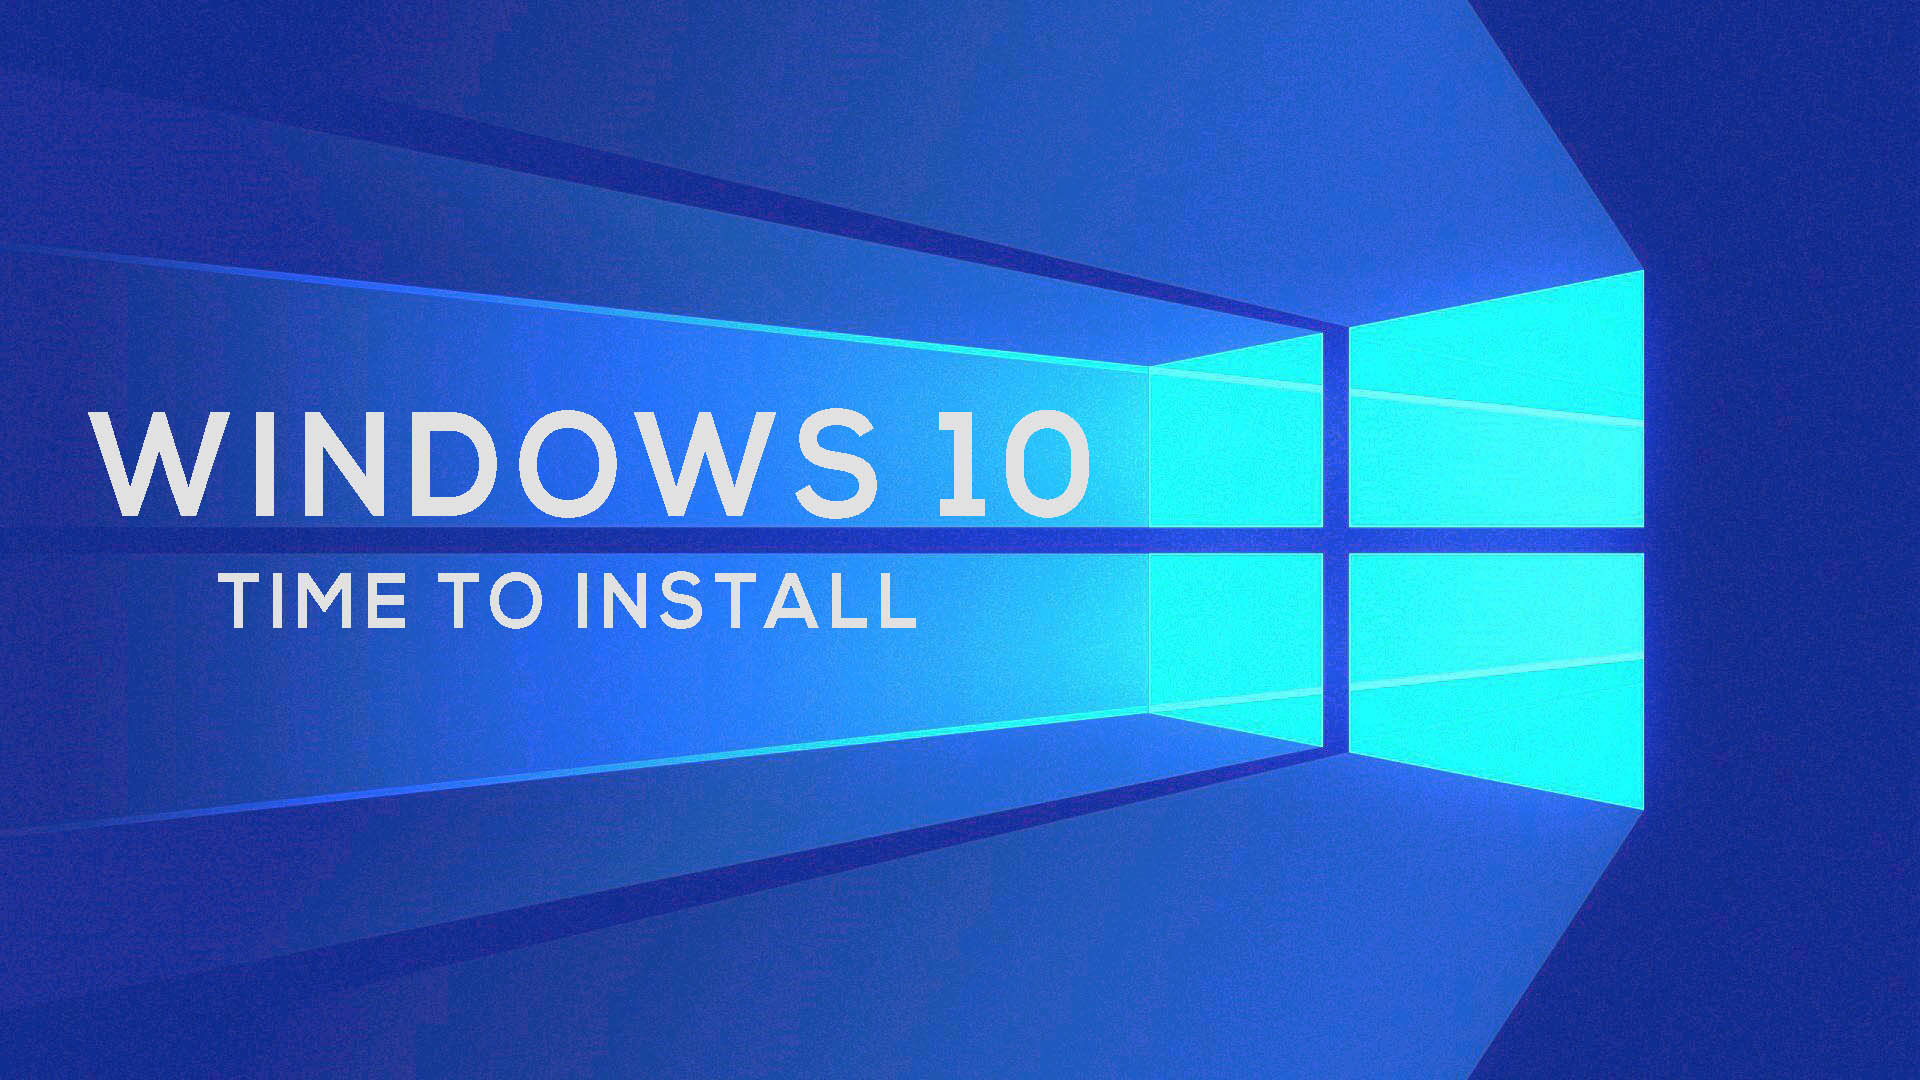 How Long Does It Take To Install Windows 10?